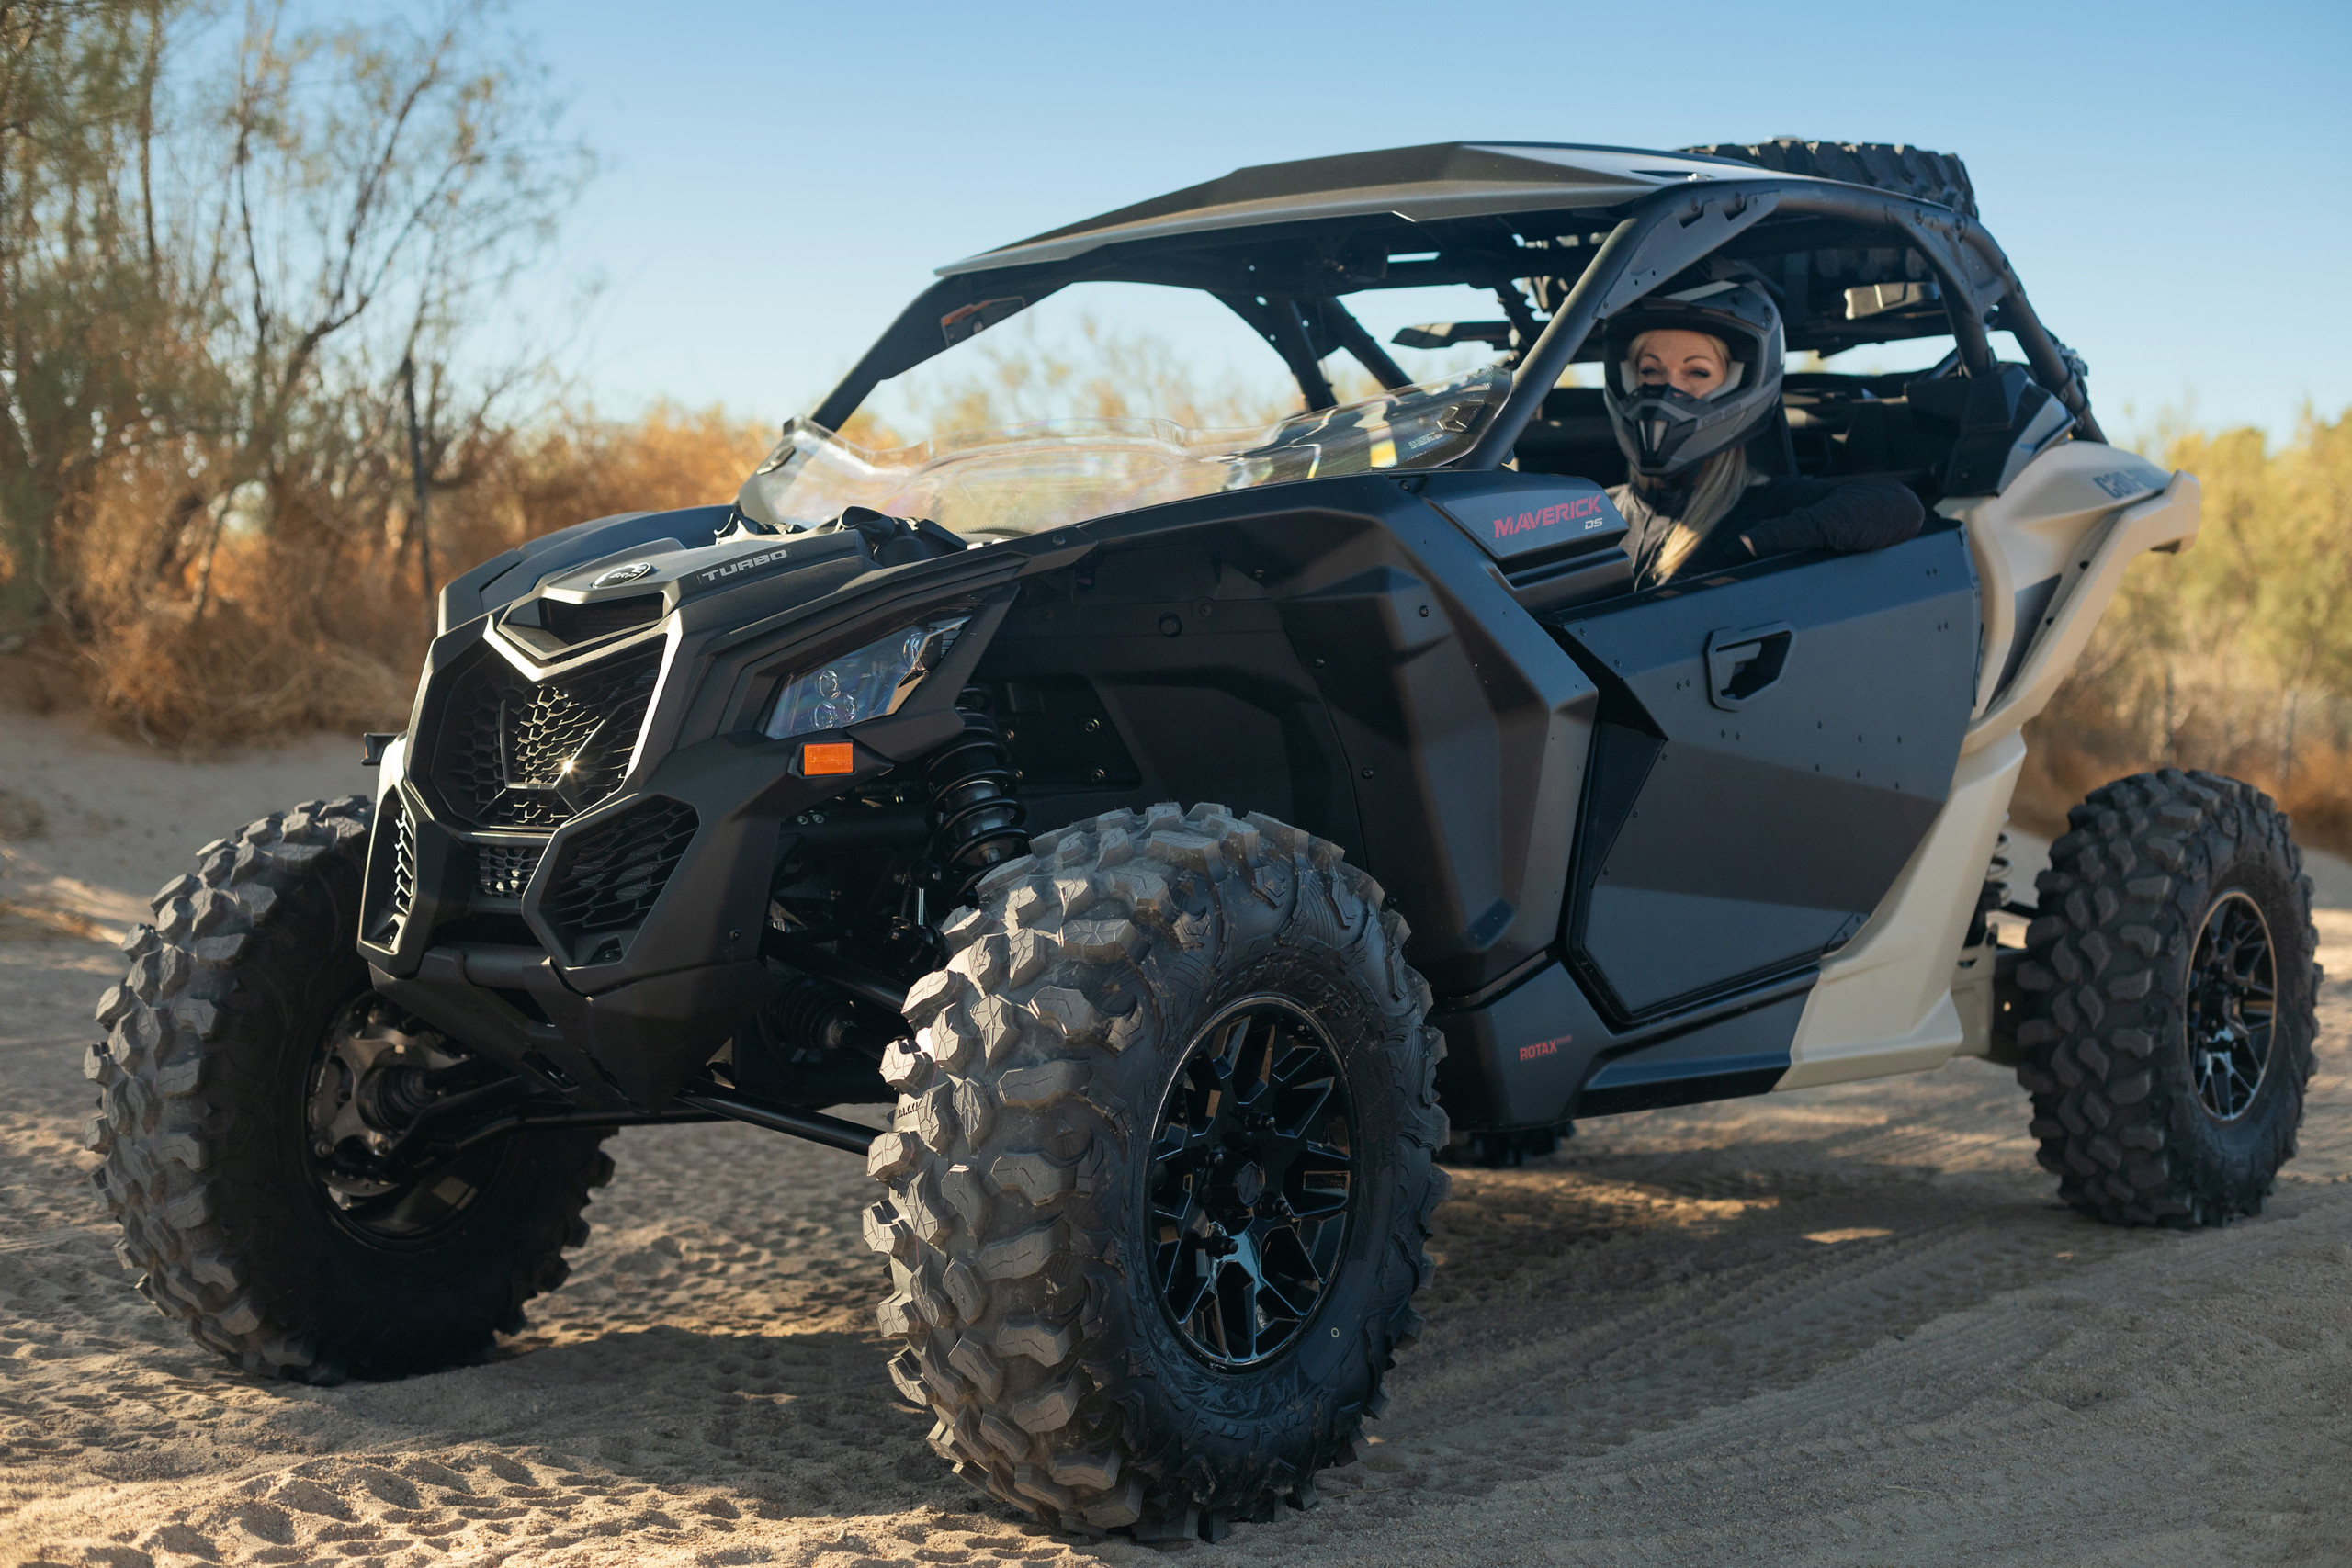 Can-Am Maverick UTV parked on sandy trail, showcasing passenger side drive - Off-road adventure with power and style